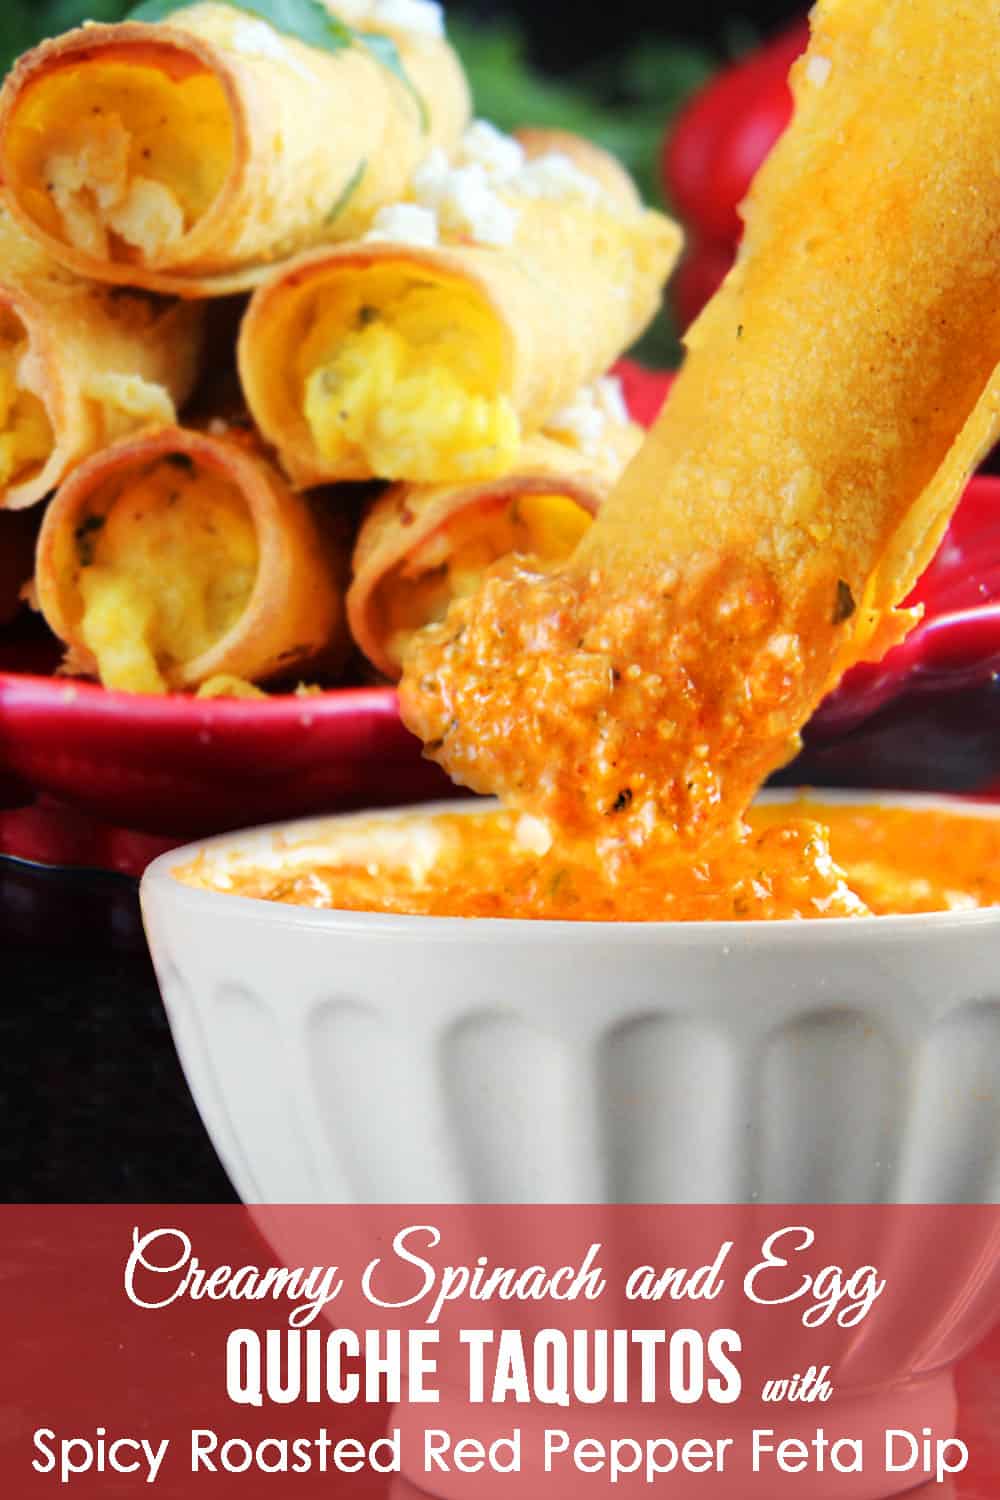 Breakfast Taquitos on a red plate with a red pepper and feta dipping sauce. 